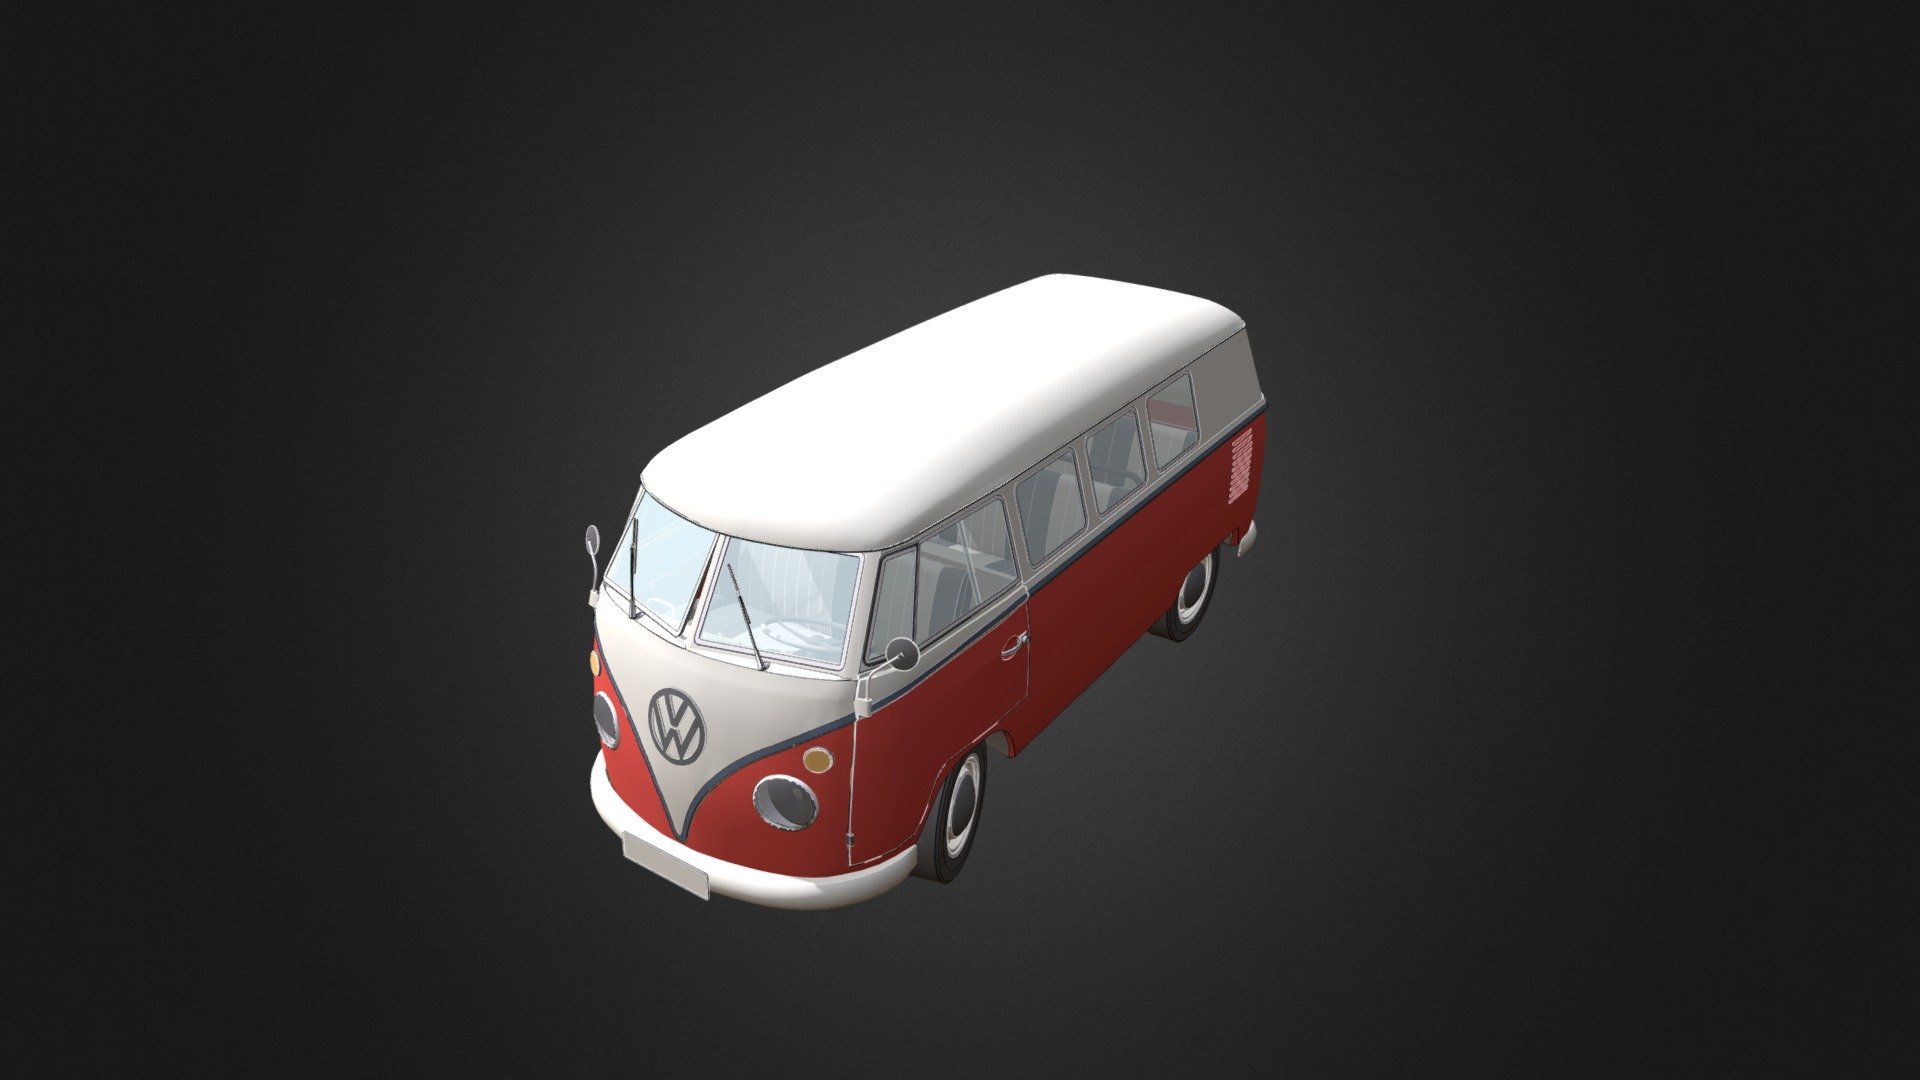 The Volkswagen Type 2, known officially (depending on body type) as the Transporter, Kombi or Microbus, or, informally, as the Bus (US) or Camper (UK), is a forward control panel van introduced in 1950 by the German automaker Volkswagen as its second car model 3d model